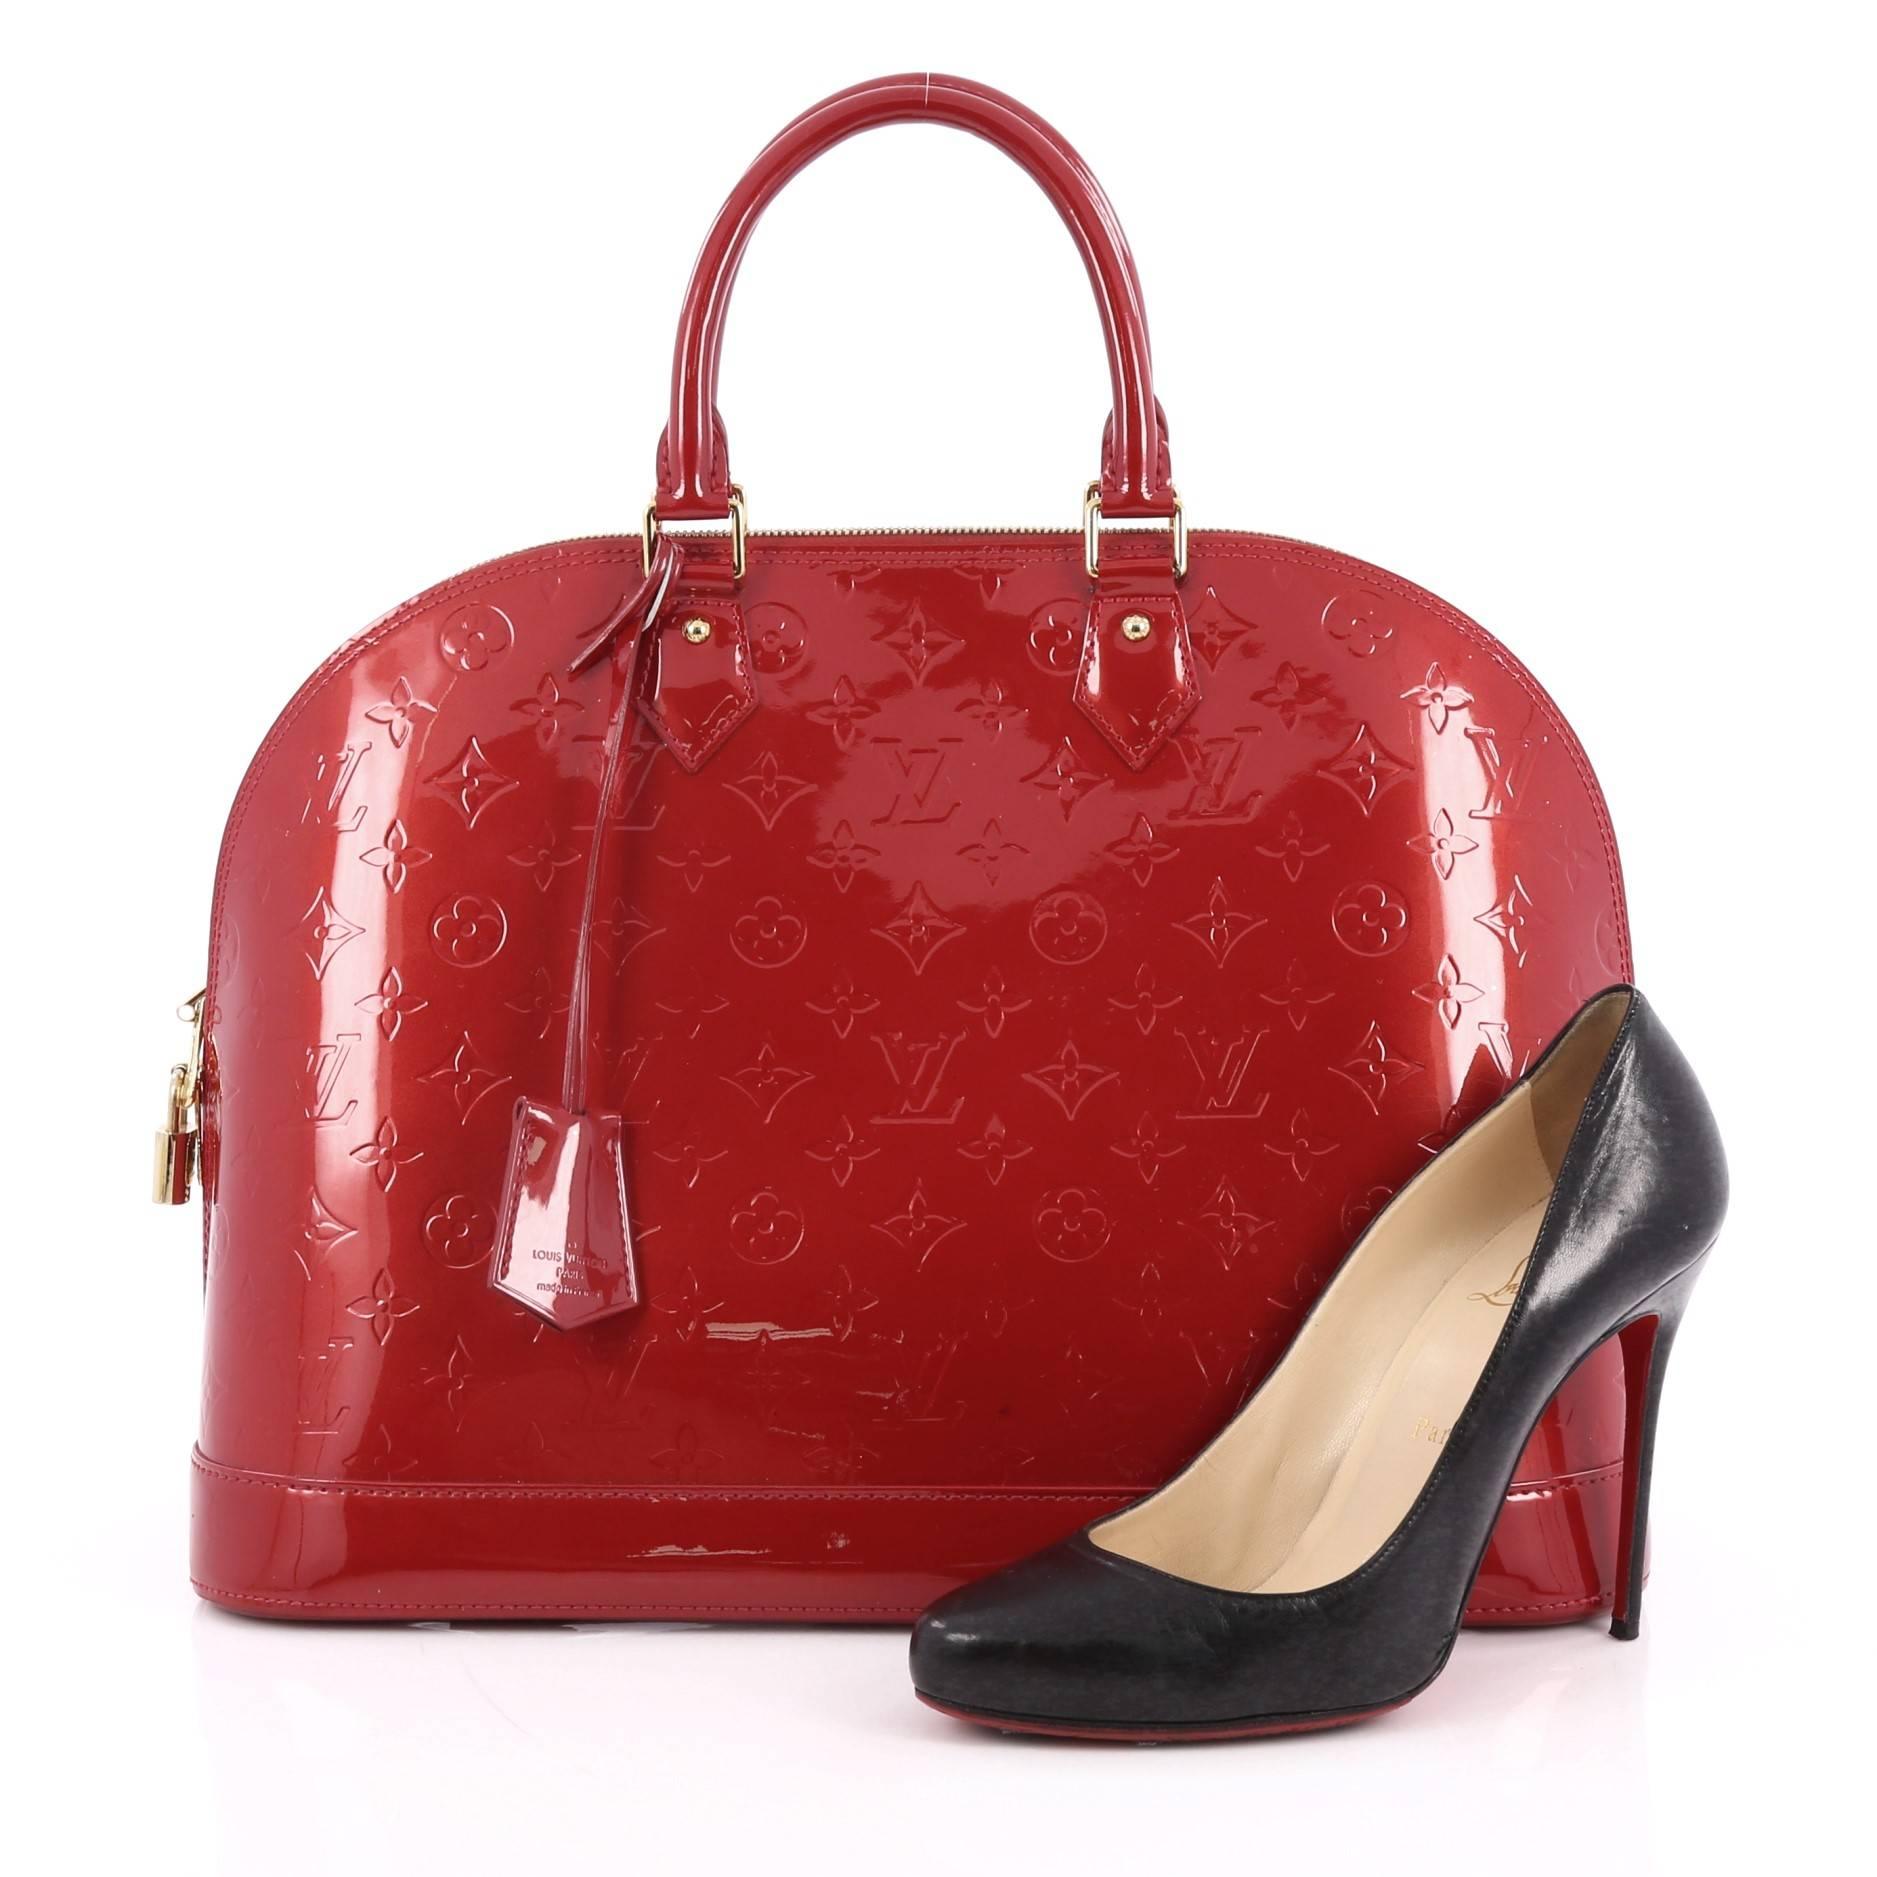 This authentic Louis Vuitton Alma Handbag Monogram Vernis GM is a fresh and elegant spin on a classic style that is perfect for all seasons. Crafted from Louis Vuitton's red monogram vernis, this dome-shaped satchel features dual-rolled handles,